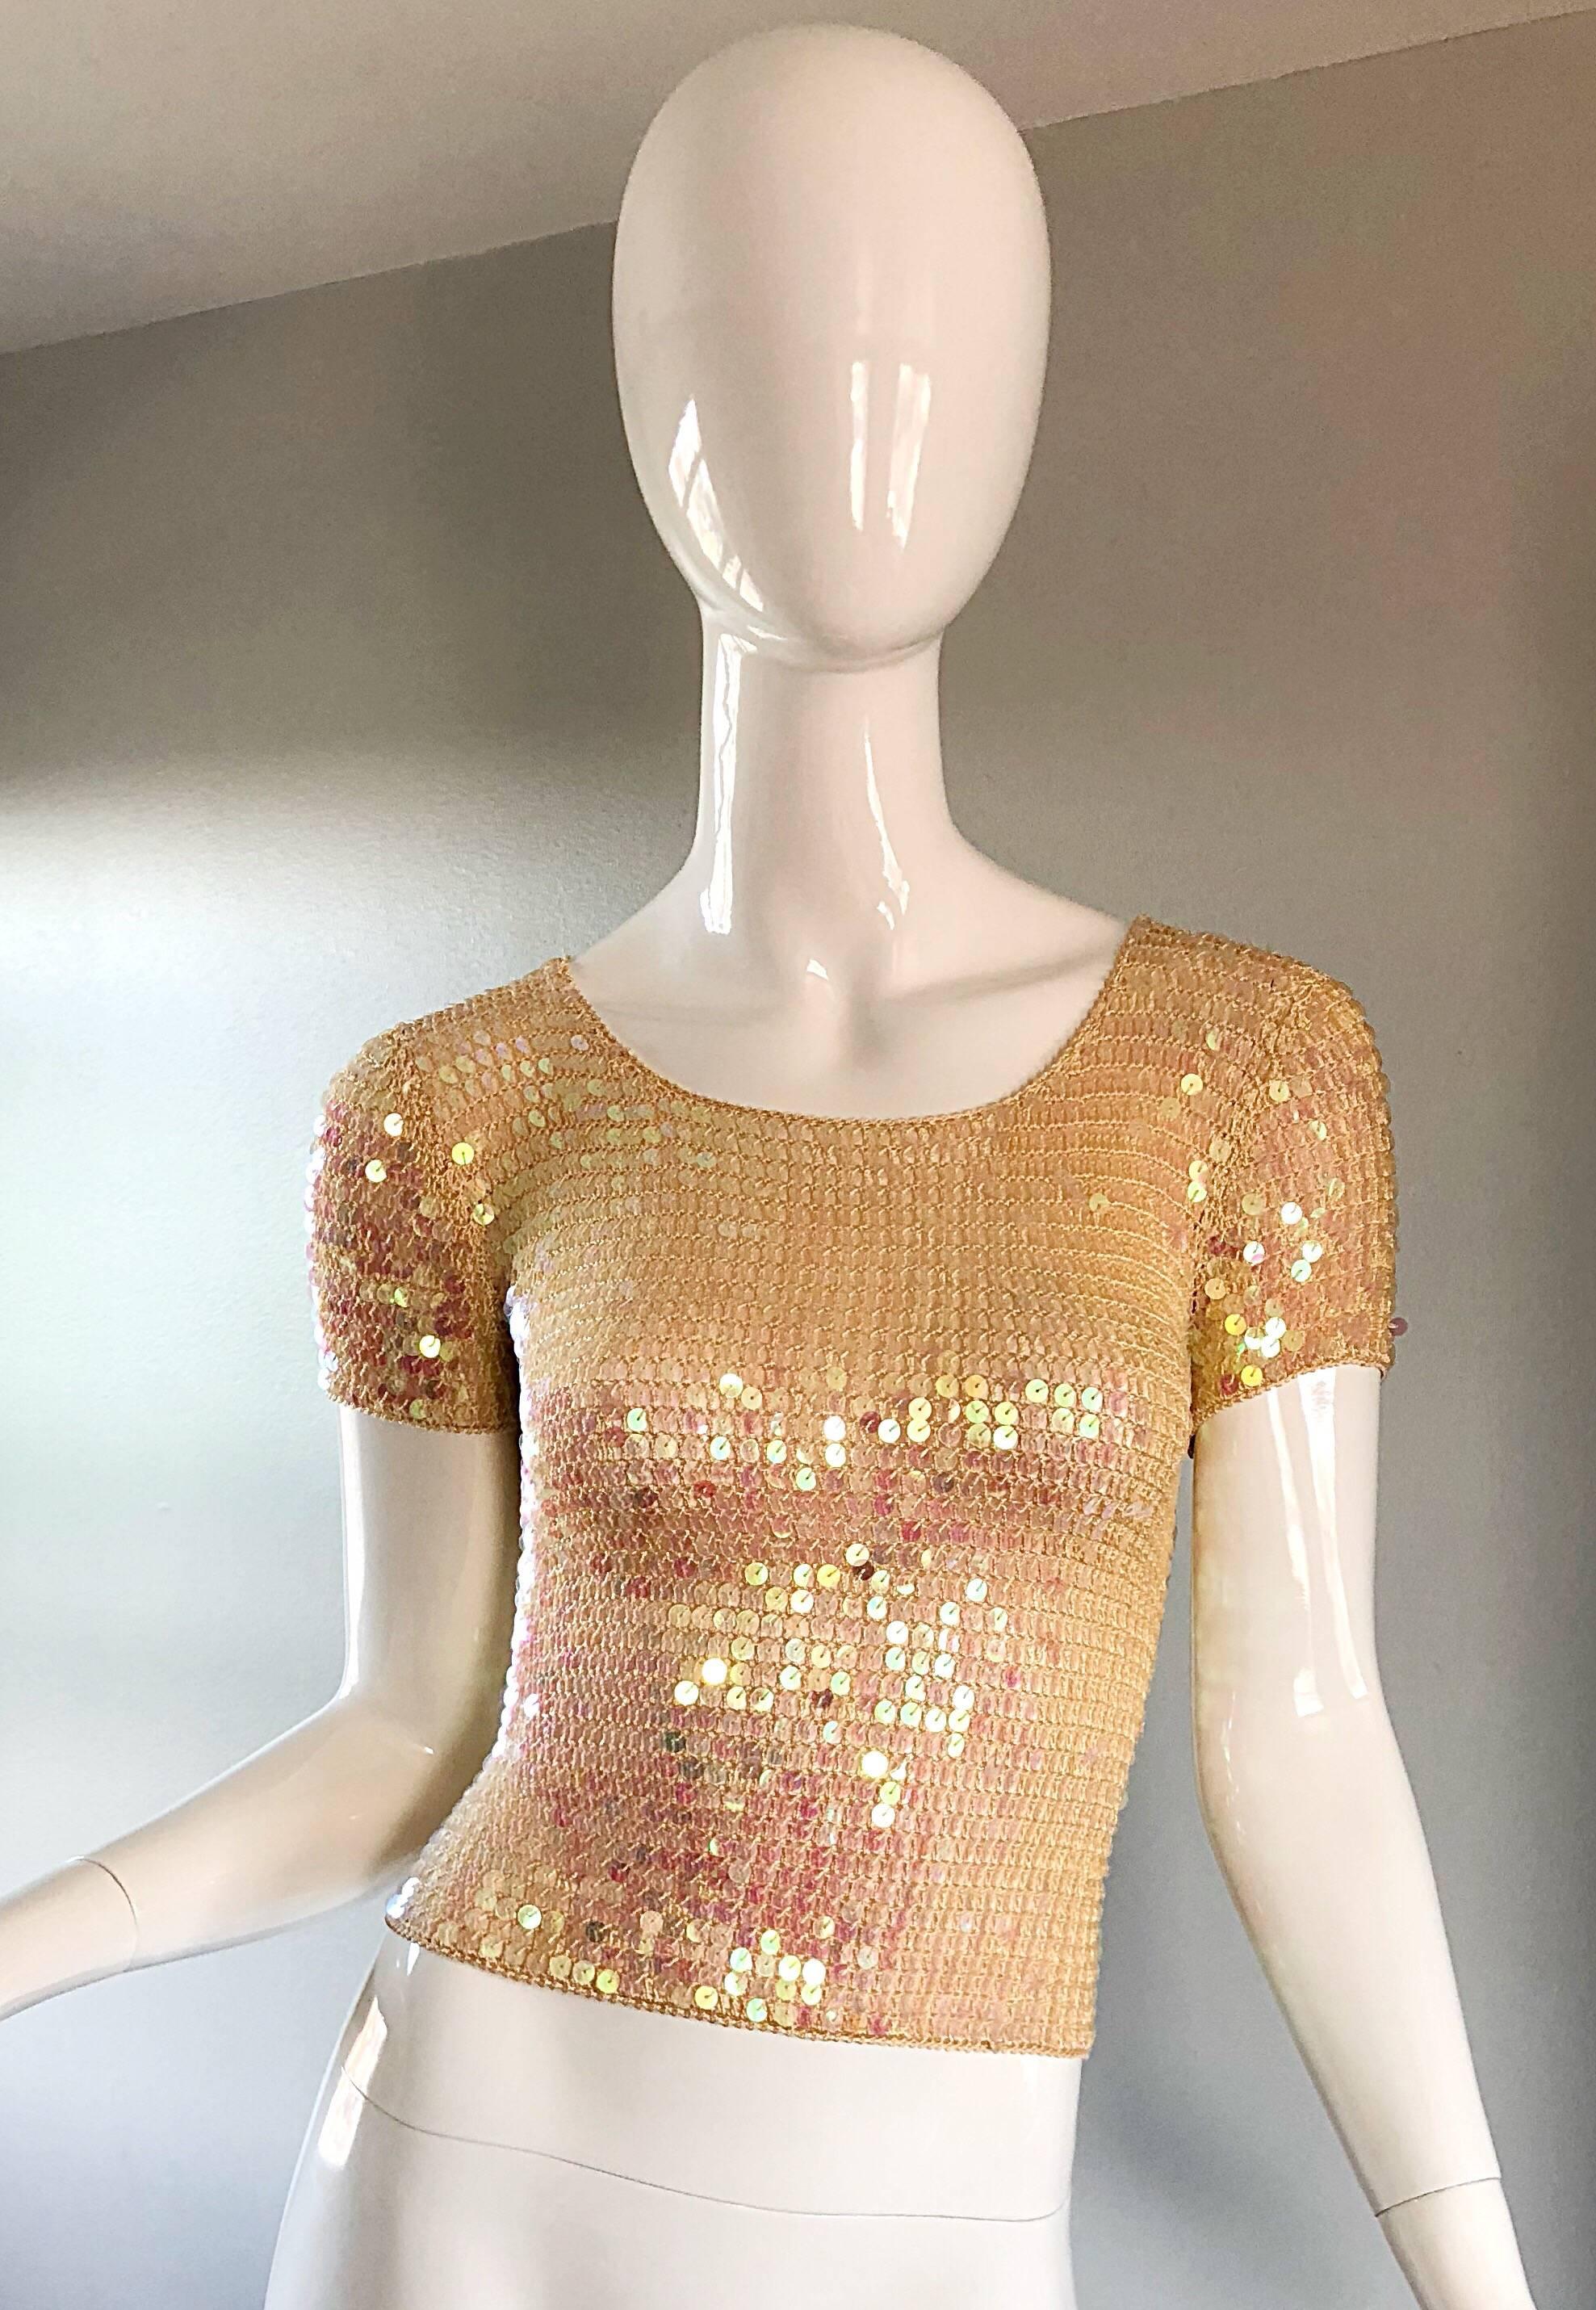 Fabulous sexy 90s pink champagne knit crochet sequin crop top! Features a pink champagne colored soft knit crochet with thousands of hand-sewn iridescent sequins throughout. Simply slips over the head, and stretches to fit. Unique color matches 